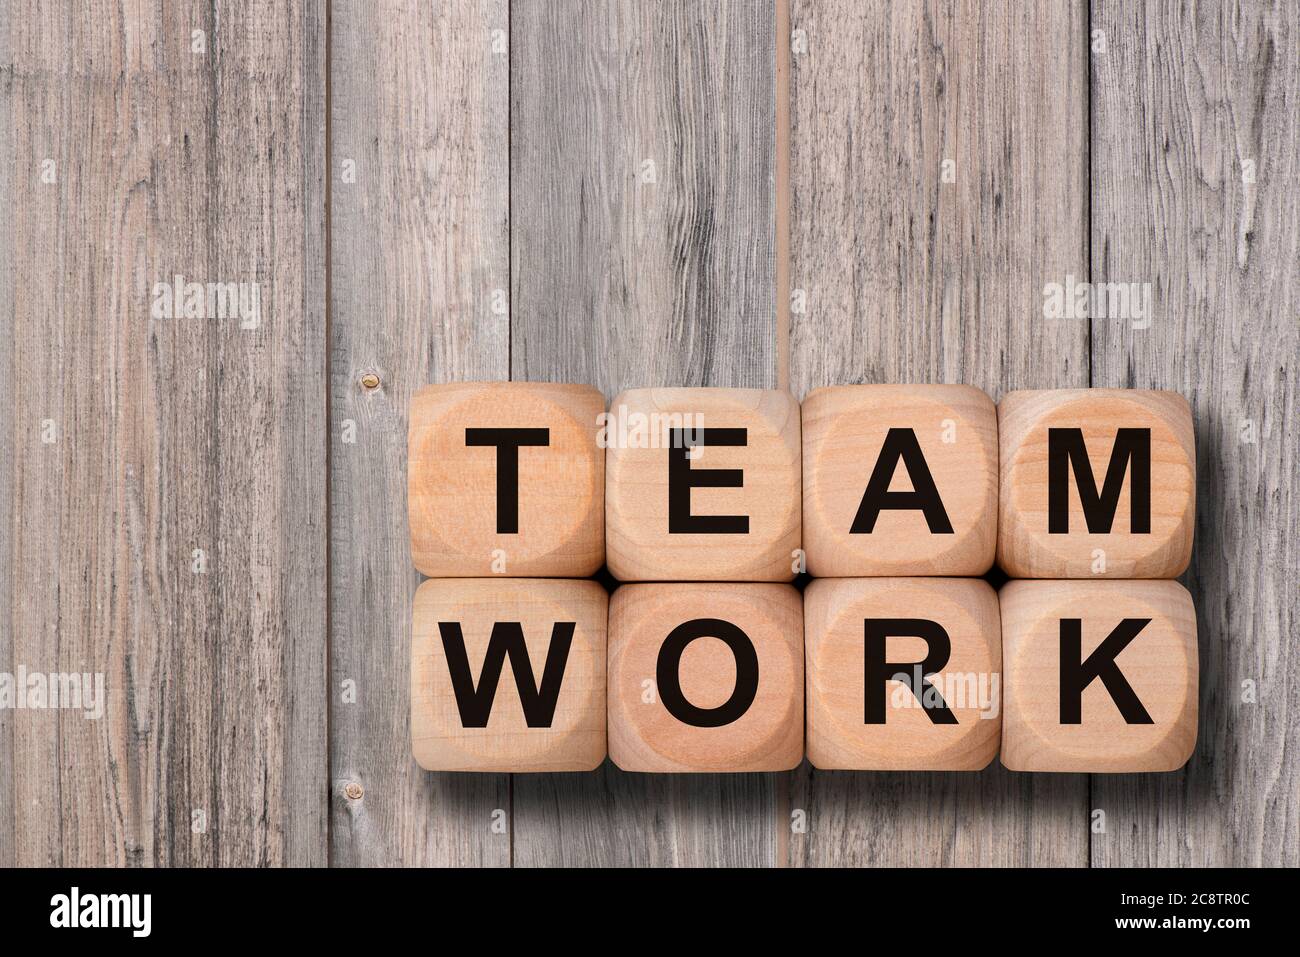 team work printed on wooden cubes Stock Photo